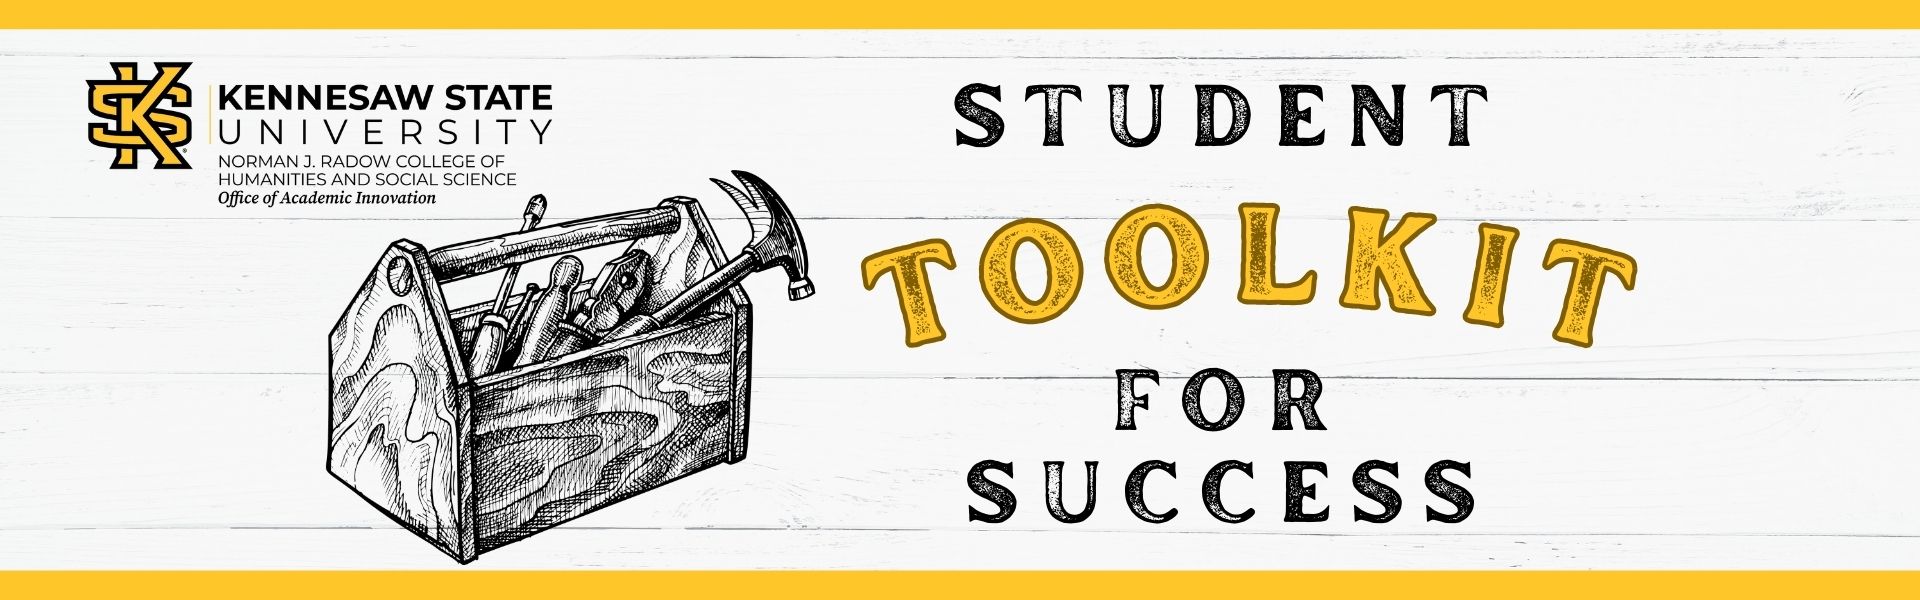 student toolkit for succes banner image